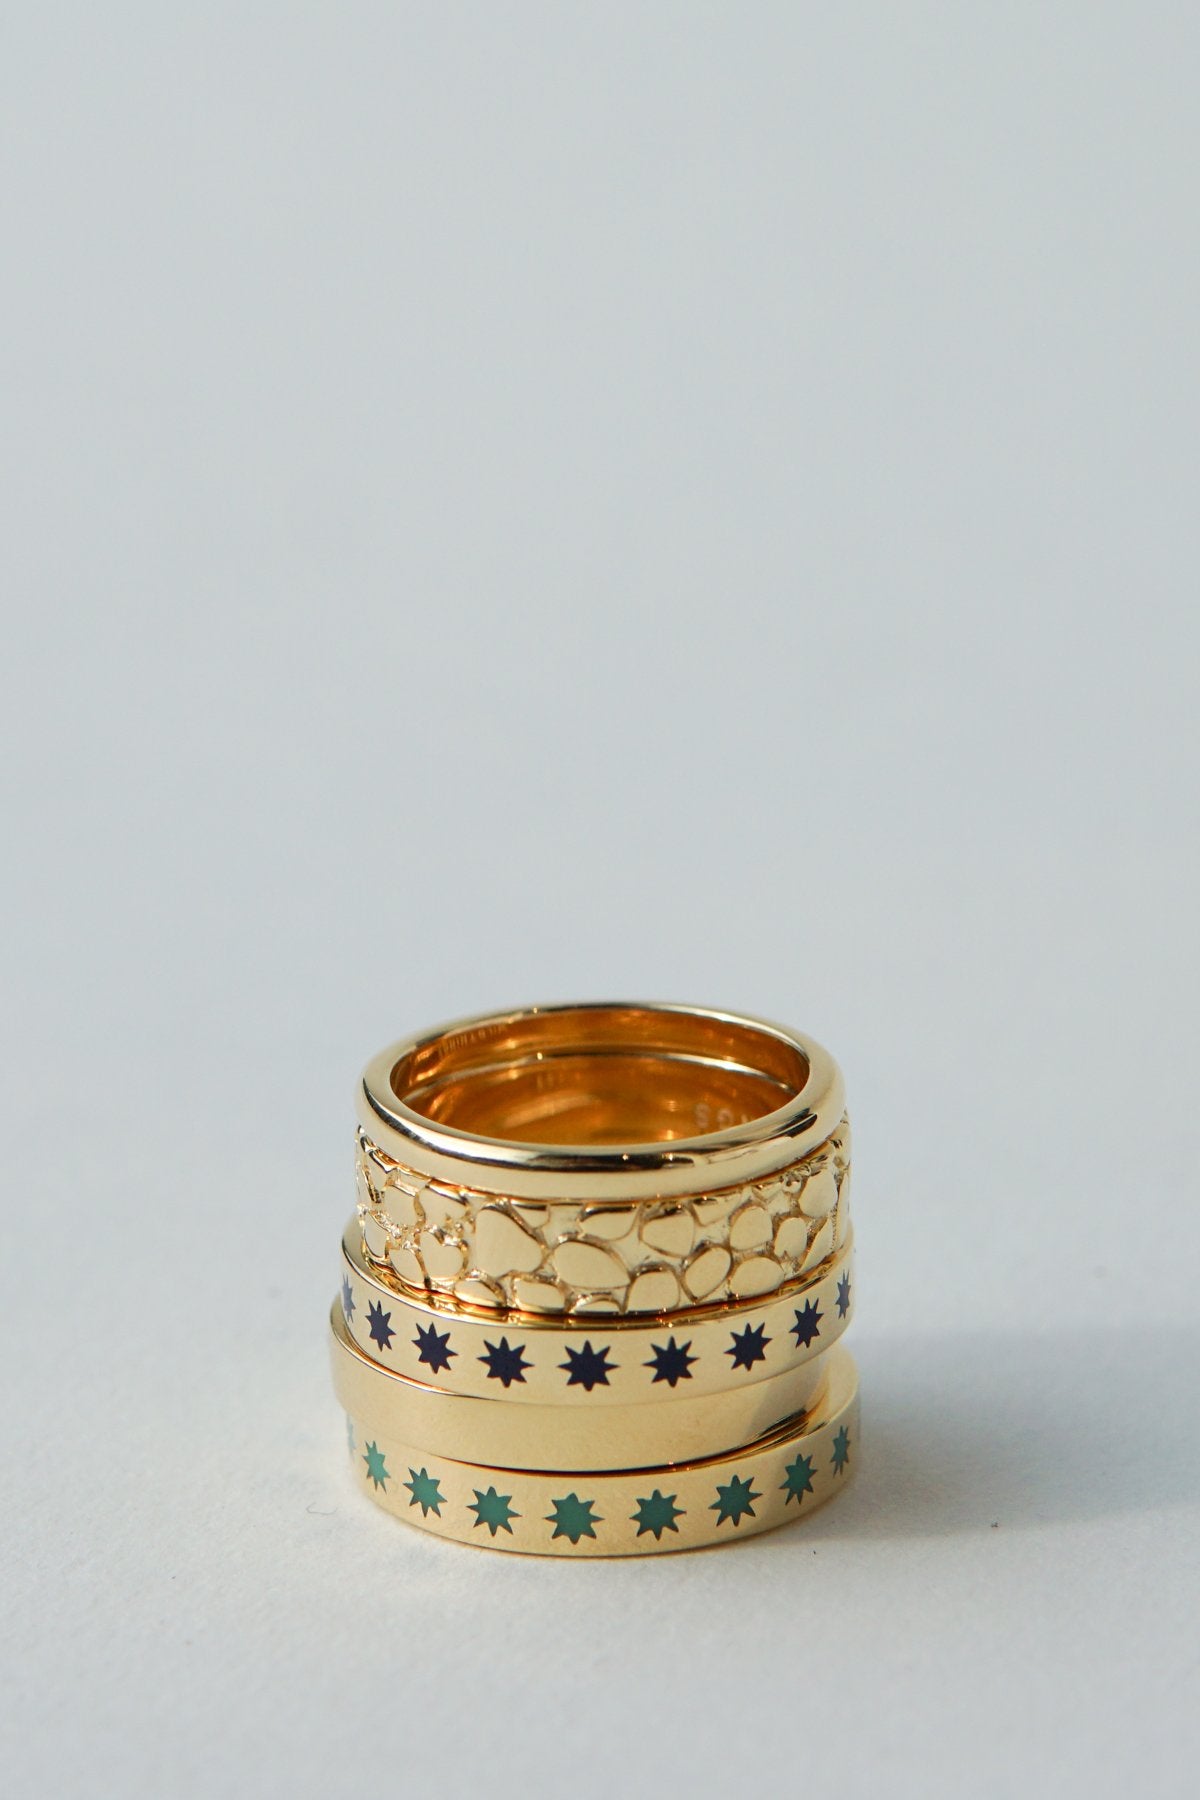 Ring Small band Gold | wildthings